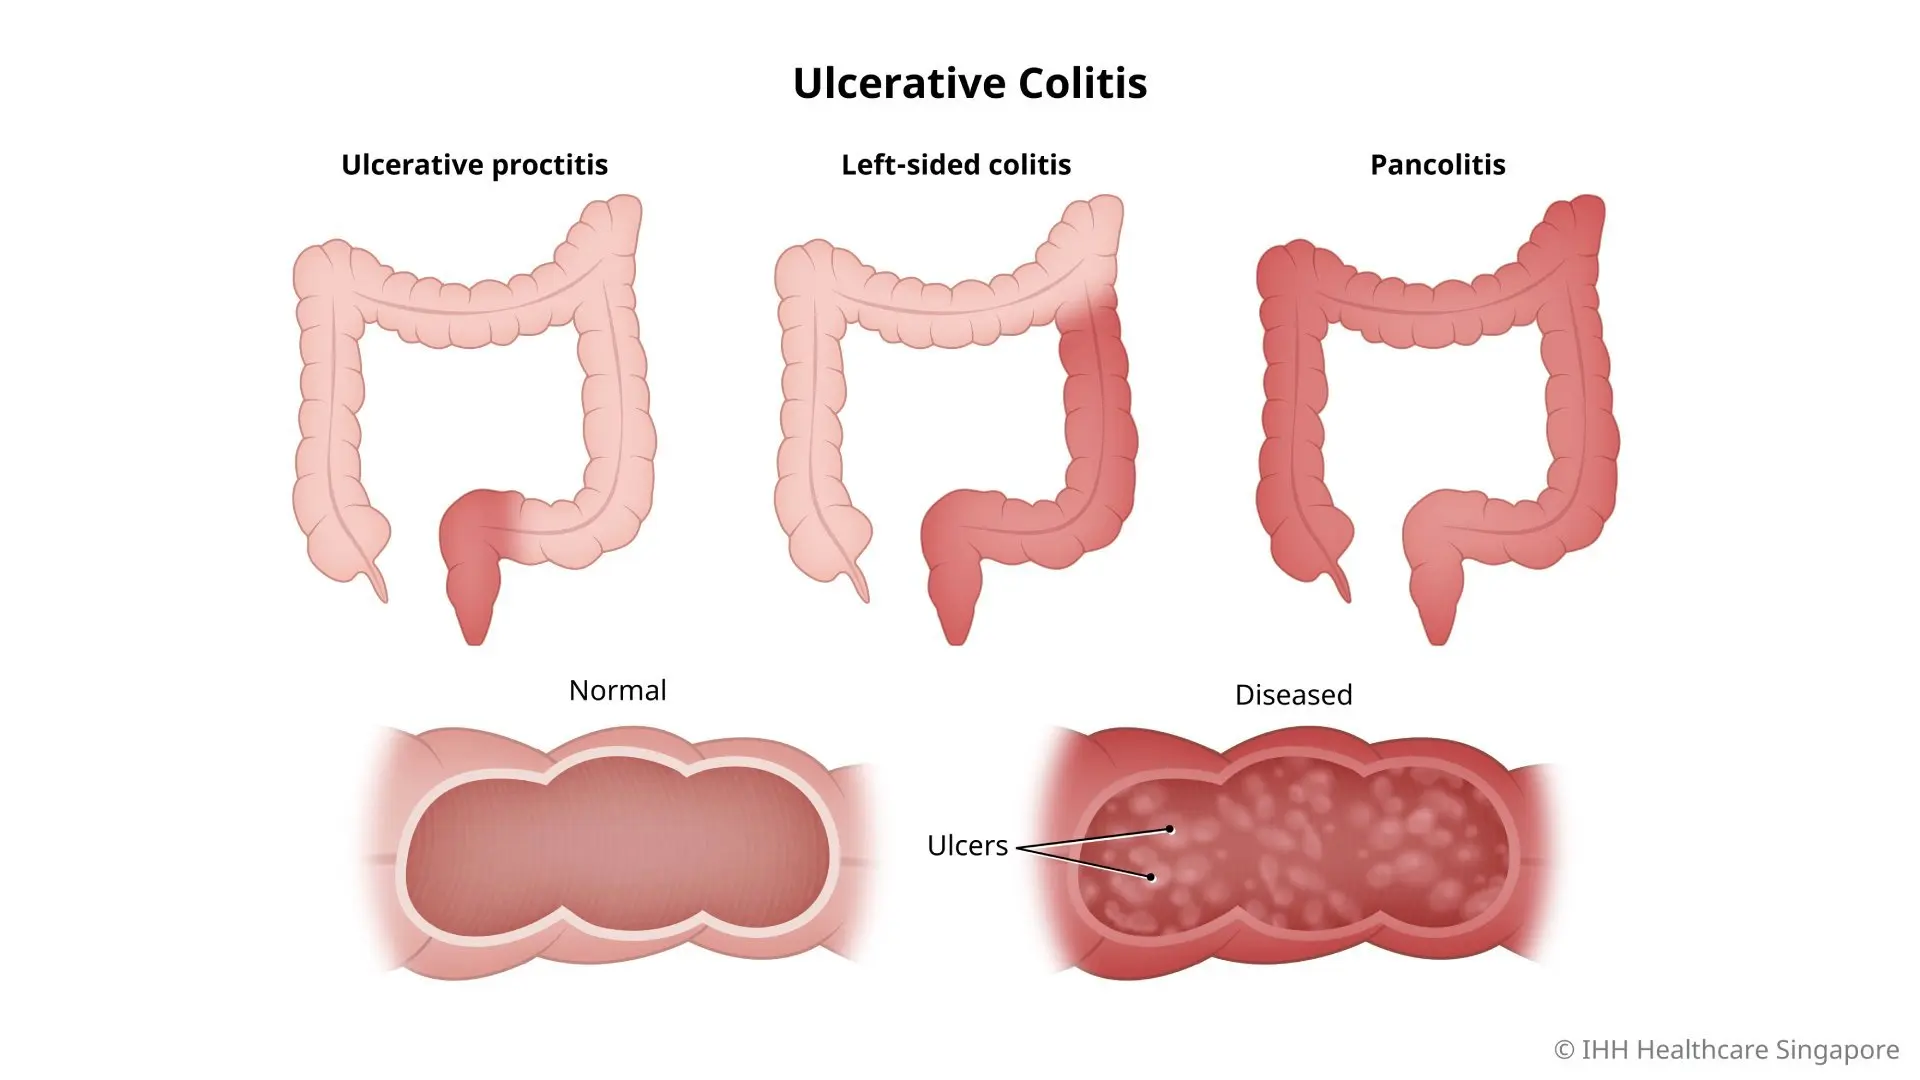 Illustration of the types of ulcerative colitis, which include ulcerative proctitis, left-sided colitis, and pancolitis.